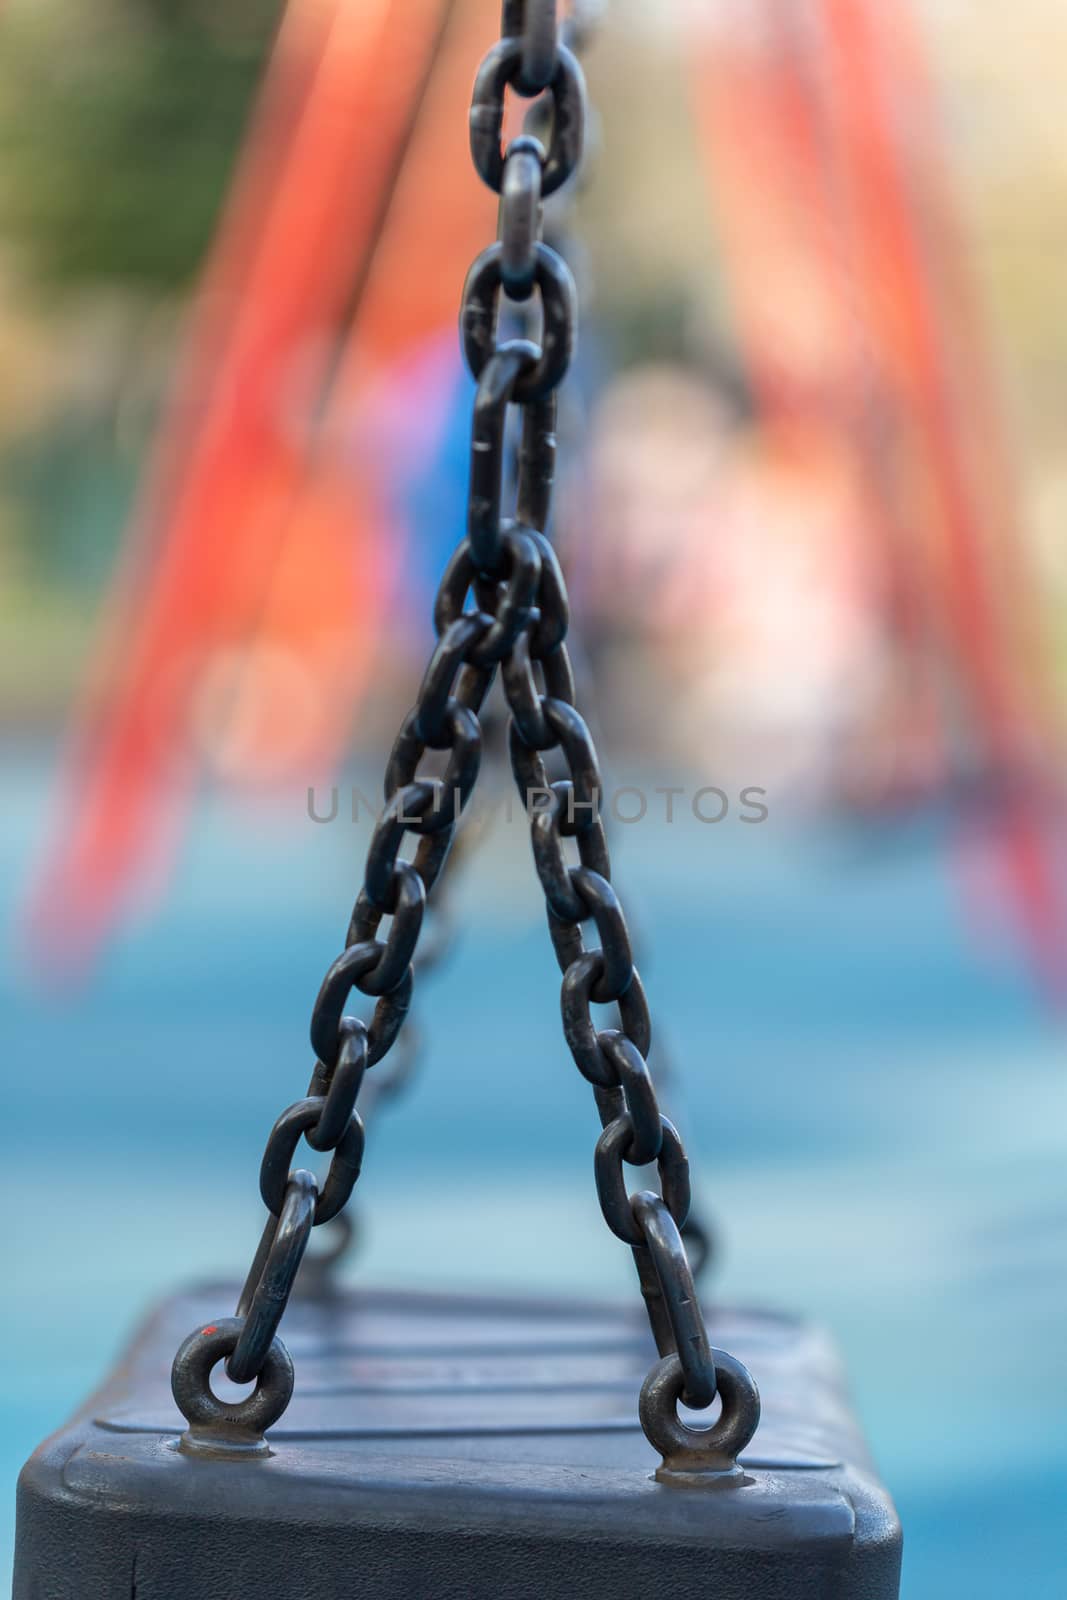 Blurred image of swings in a playground setting by magicbones